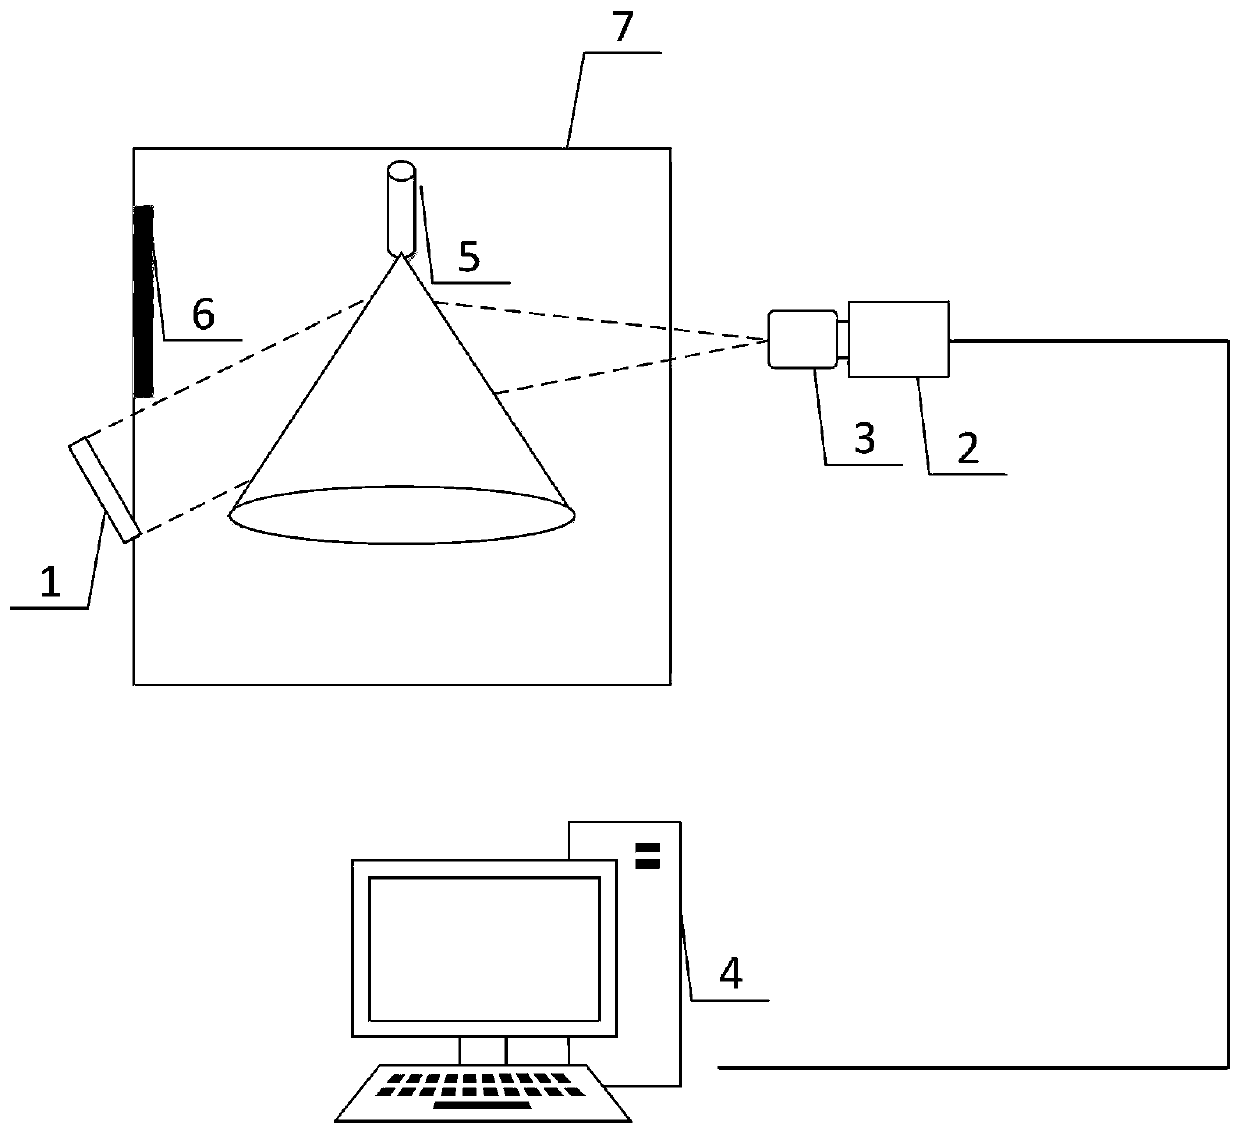 A nozzle atomization angle automatic detection system and method based on vision